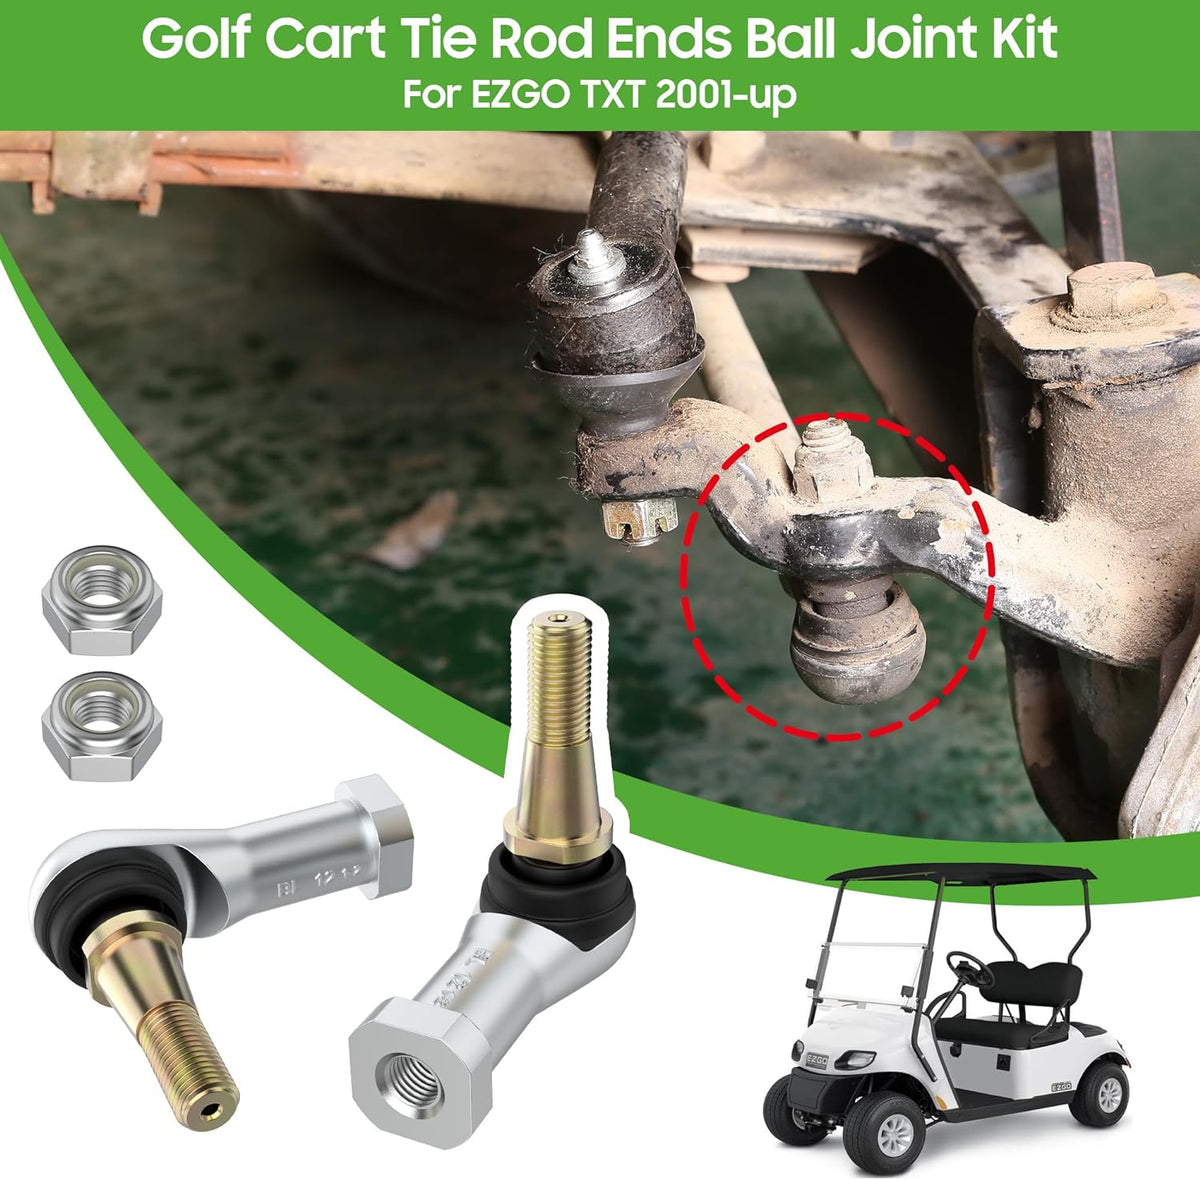 Golf Cart Tie Rod End Kit for EZGO TXT Electric & Gas Golf Cart 2001-Up